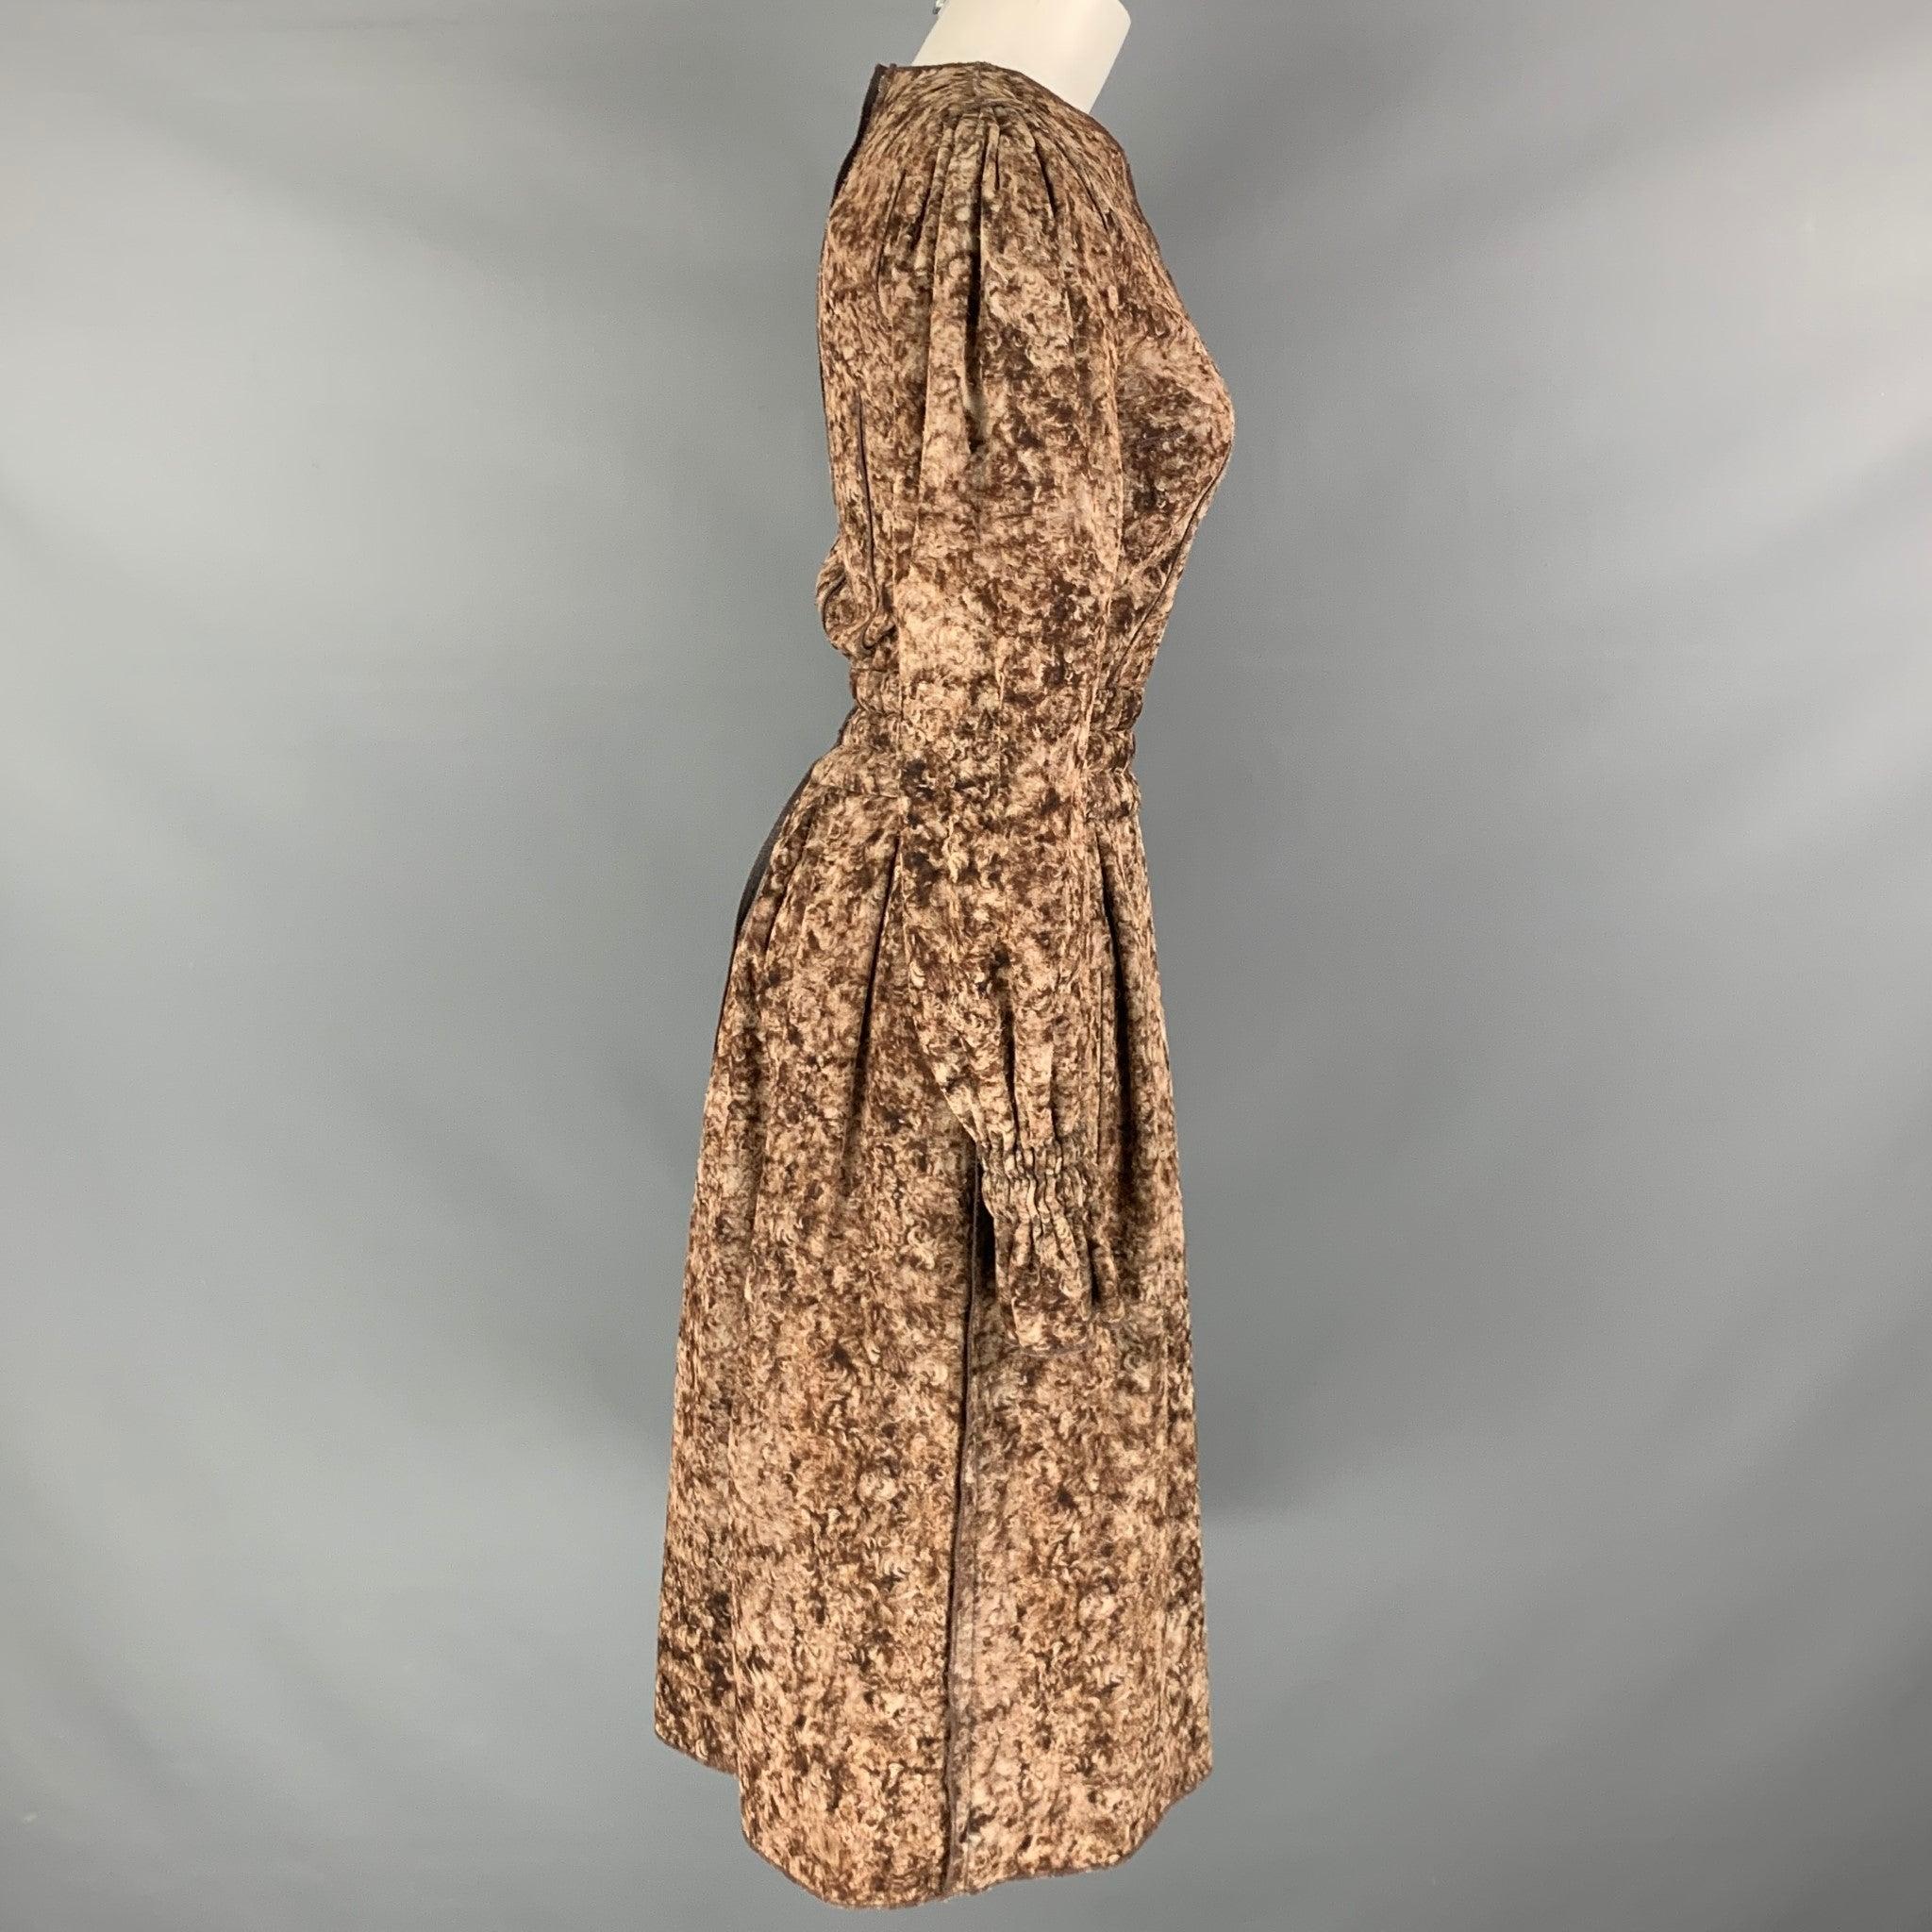 DOLCE & GABBANA dress comes in a brown & beige marble wool woven material featuring long sleeves, side pockets, a-line style, elastic waist and elastic cuffs. Made in Italy. Very Good Pre-Owned Condition. Minor broken stitches st back. 

Marked:  M